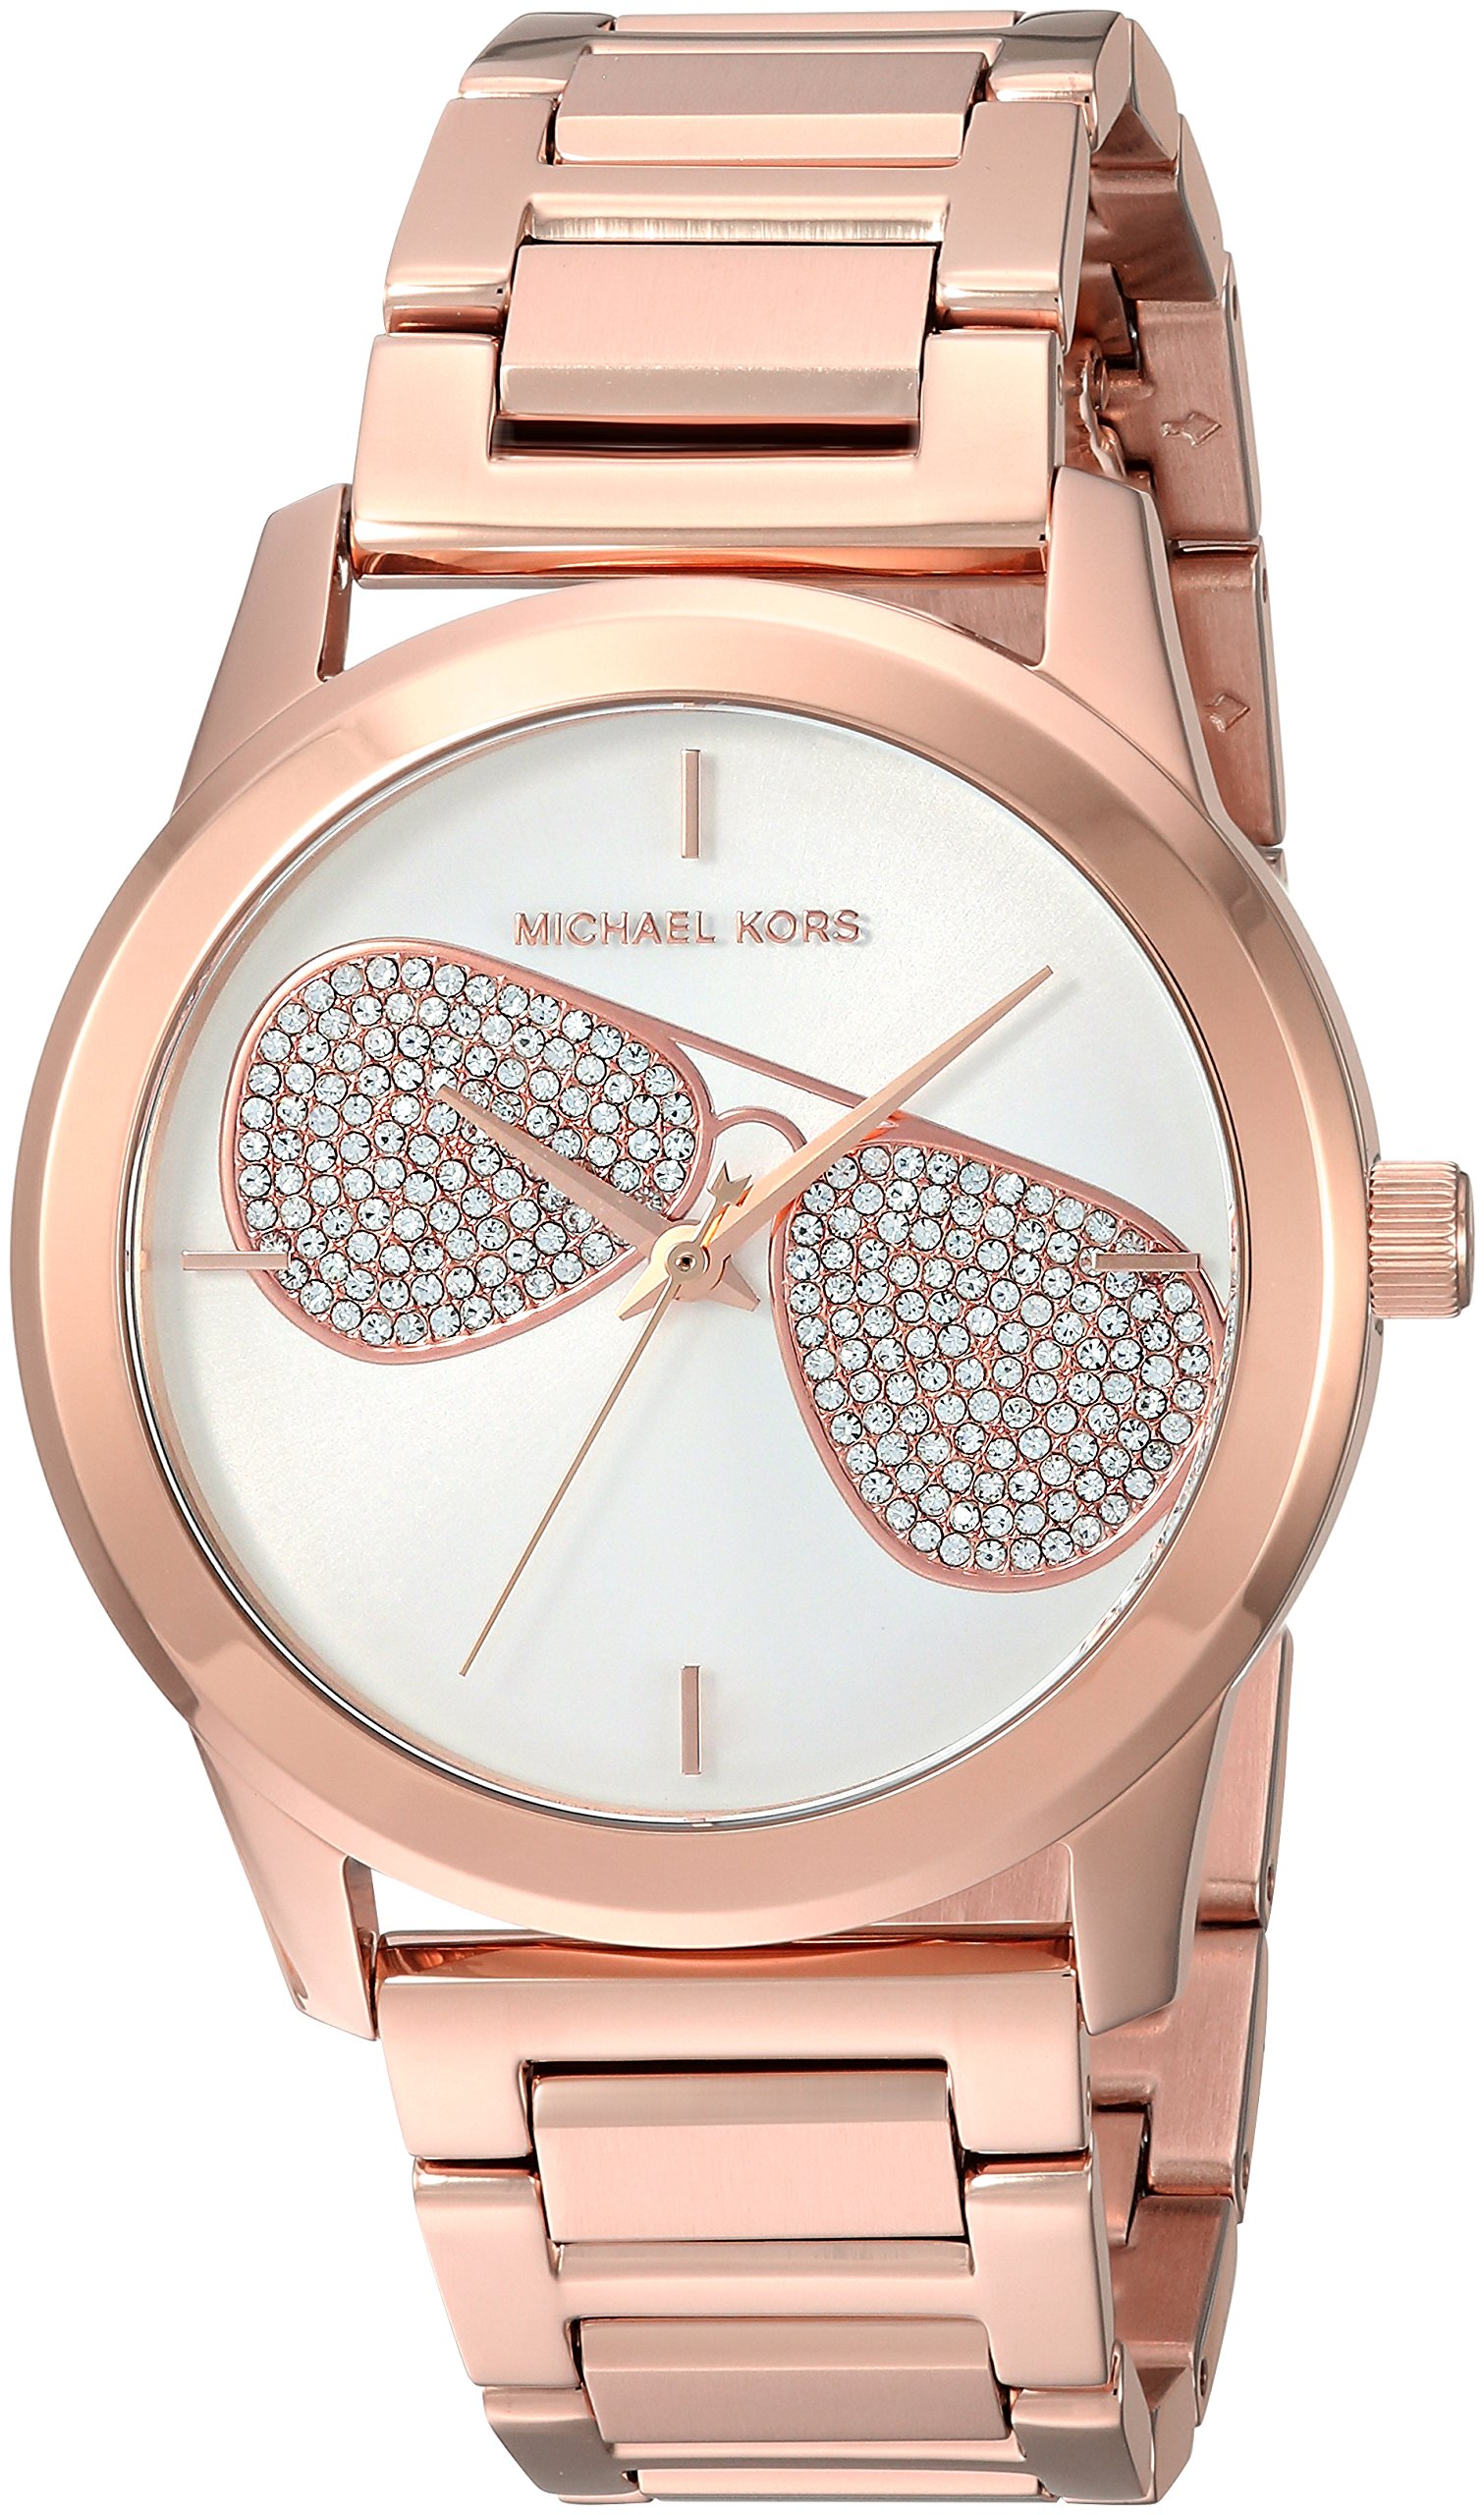 Michael Kors Women's Stainless Steel Analog-Quartz Watch with Stainless-Steel Strap, Rose Gold, 19 (Model: MK3673)